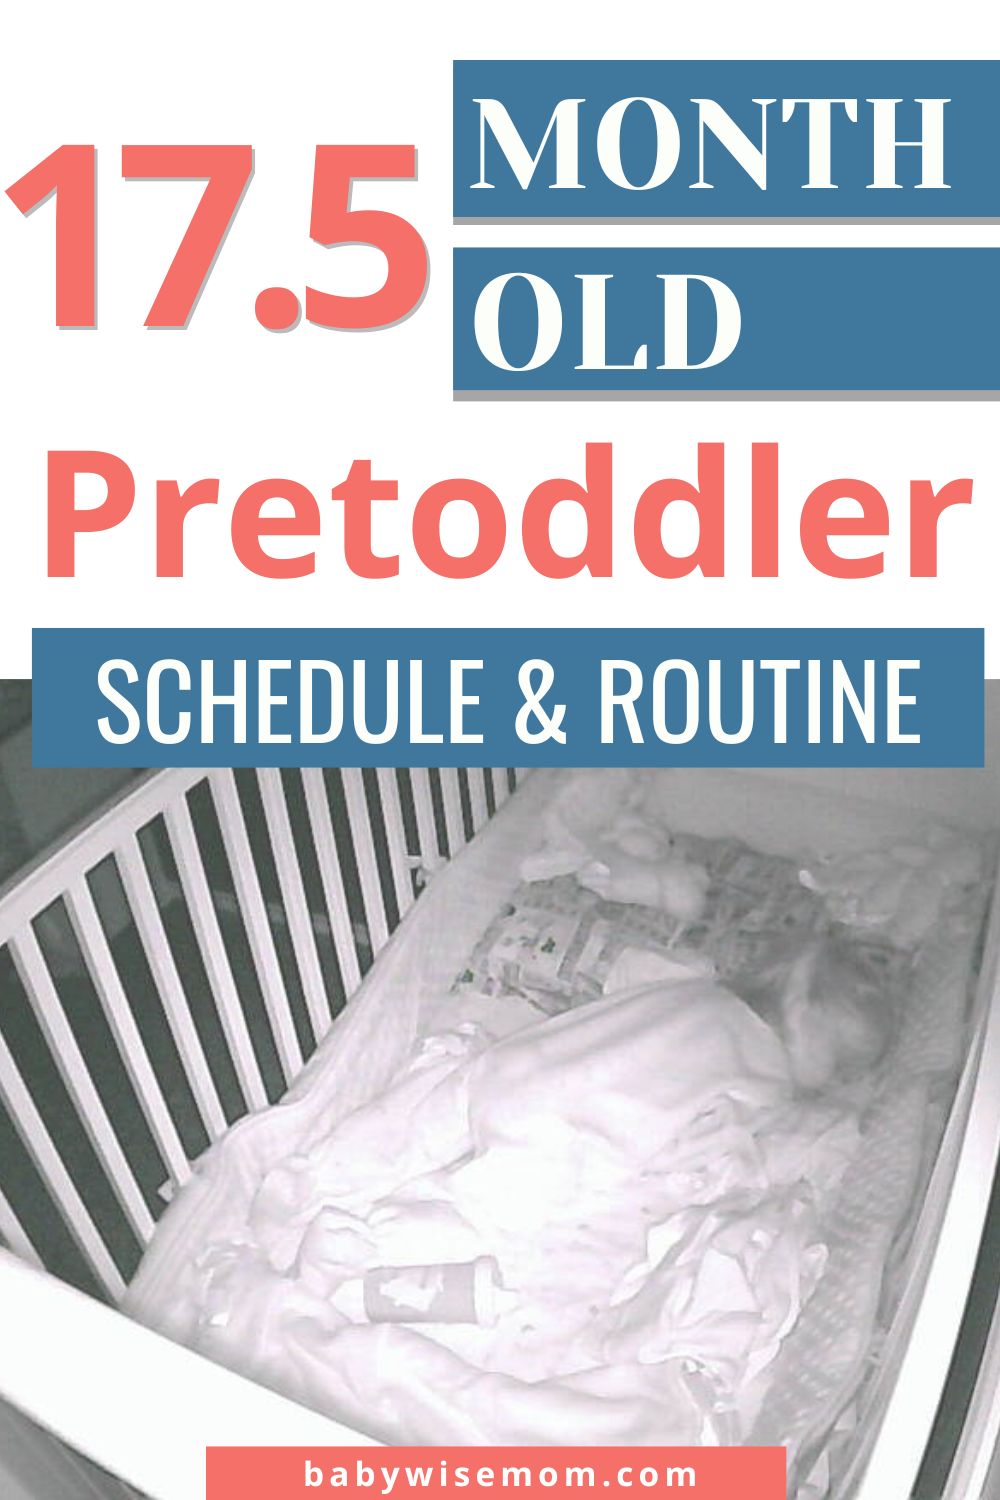 17.5 month old pretoddler schedule and routine pinnable image